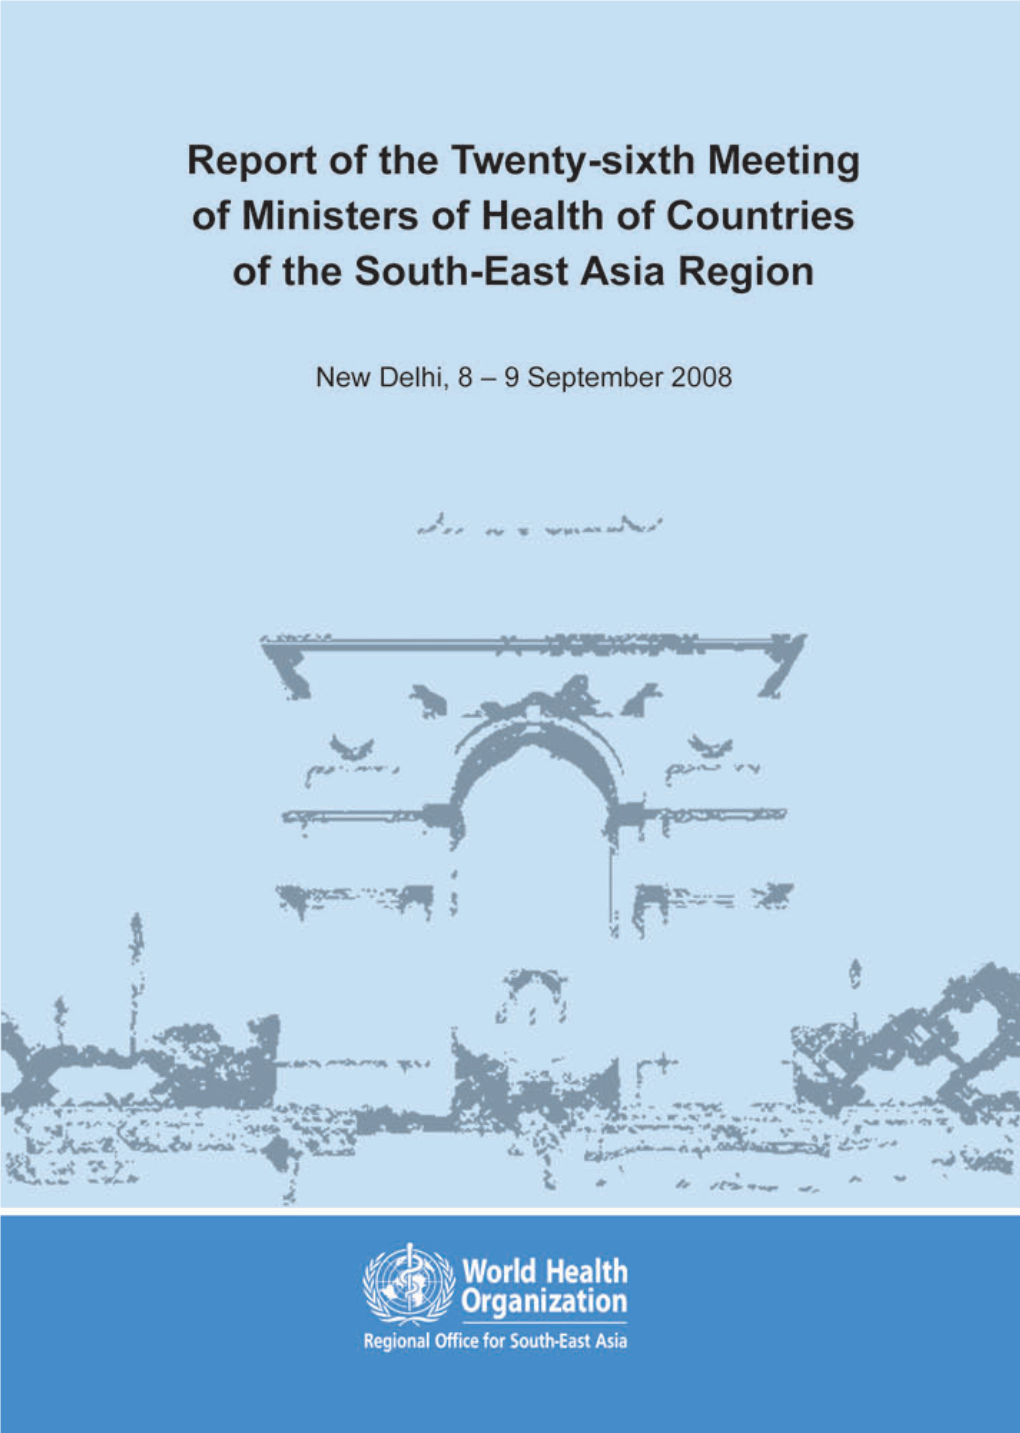 Report of the Twenty-Sixth Meeting of Ministers of Health of Countries of the South-East Asia Region